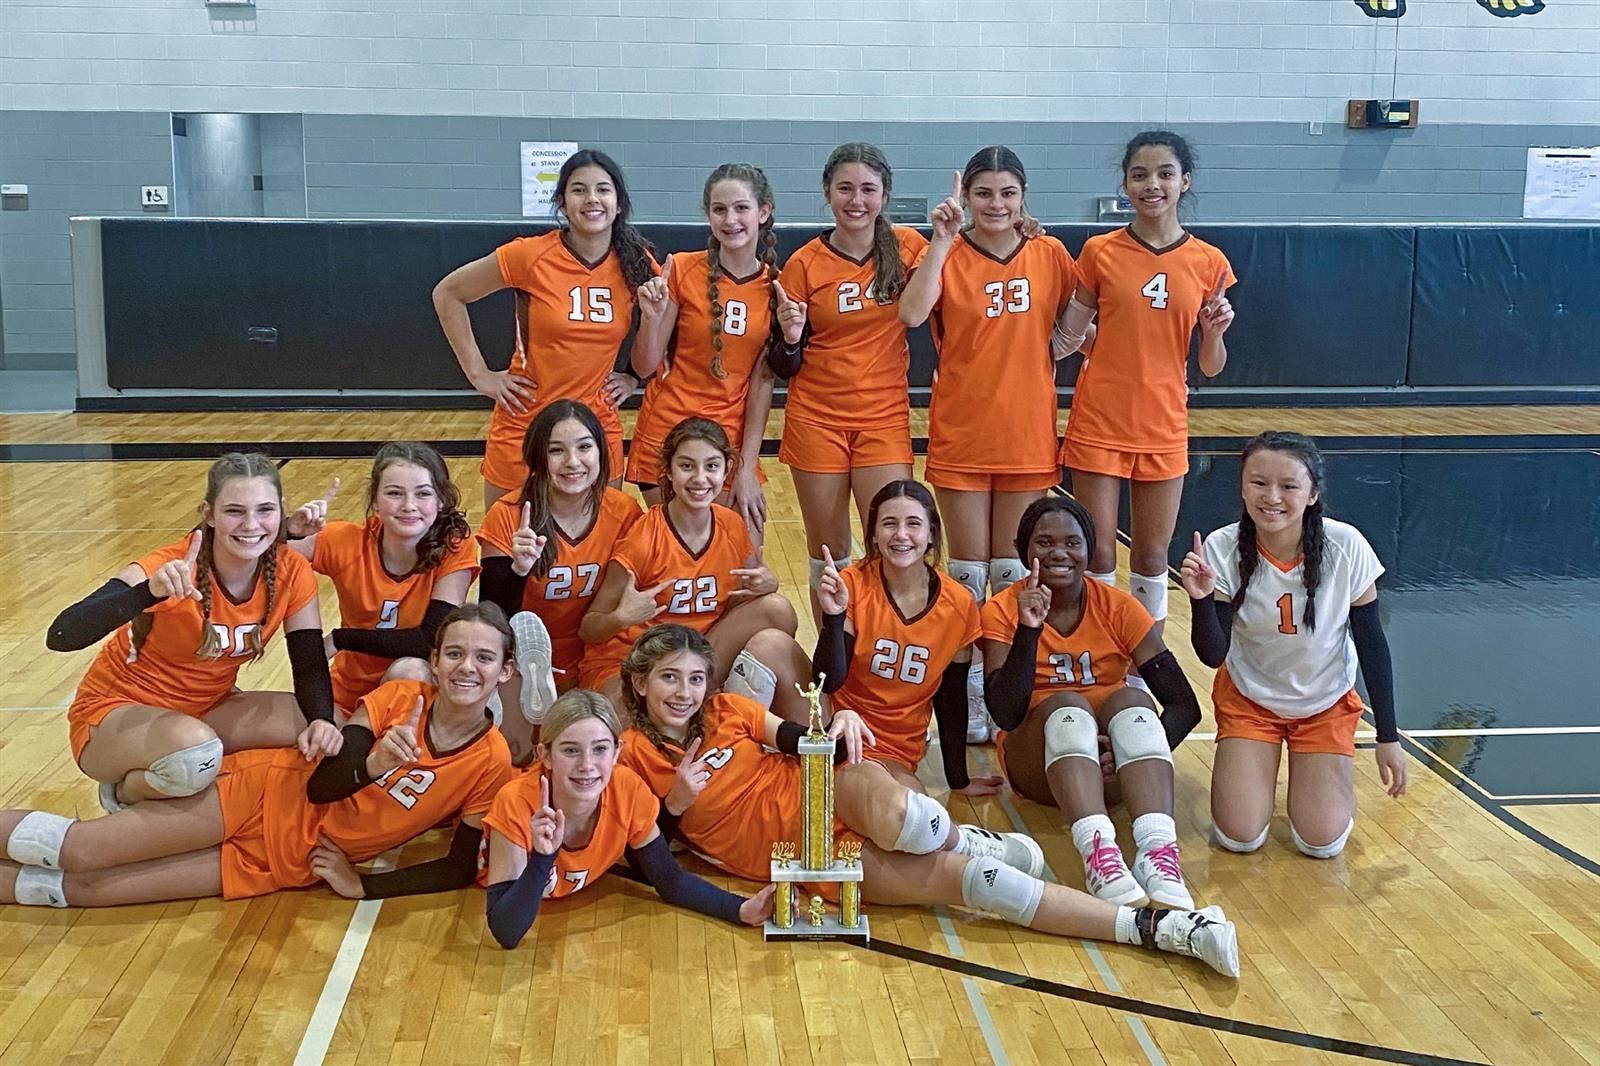 The Salyards eighth grade volleyball B team poses after winning the CFISD Middle School “B” Volleyball Tournament.